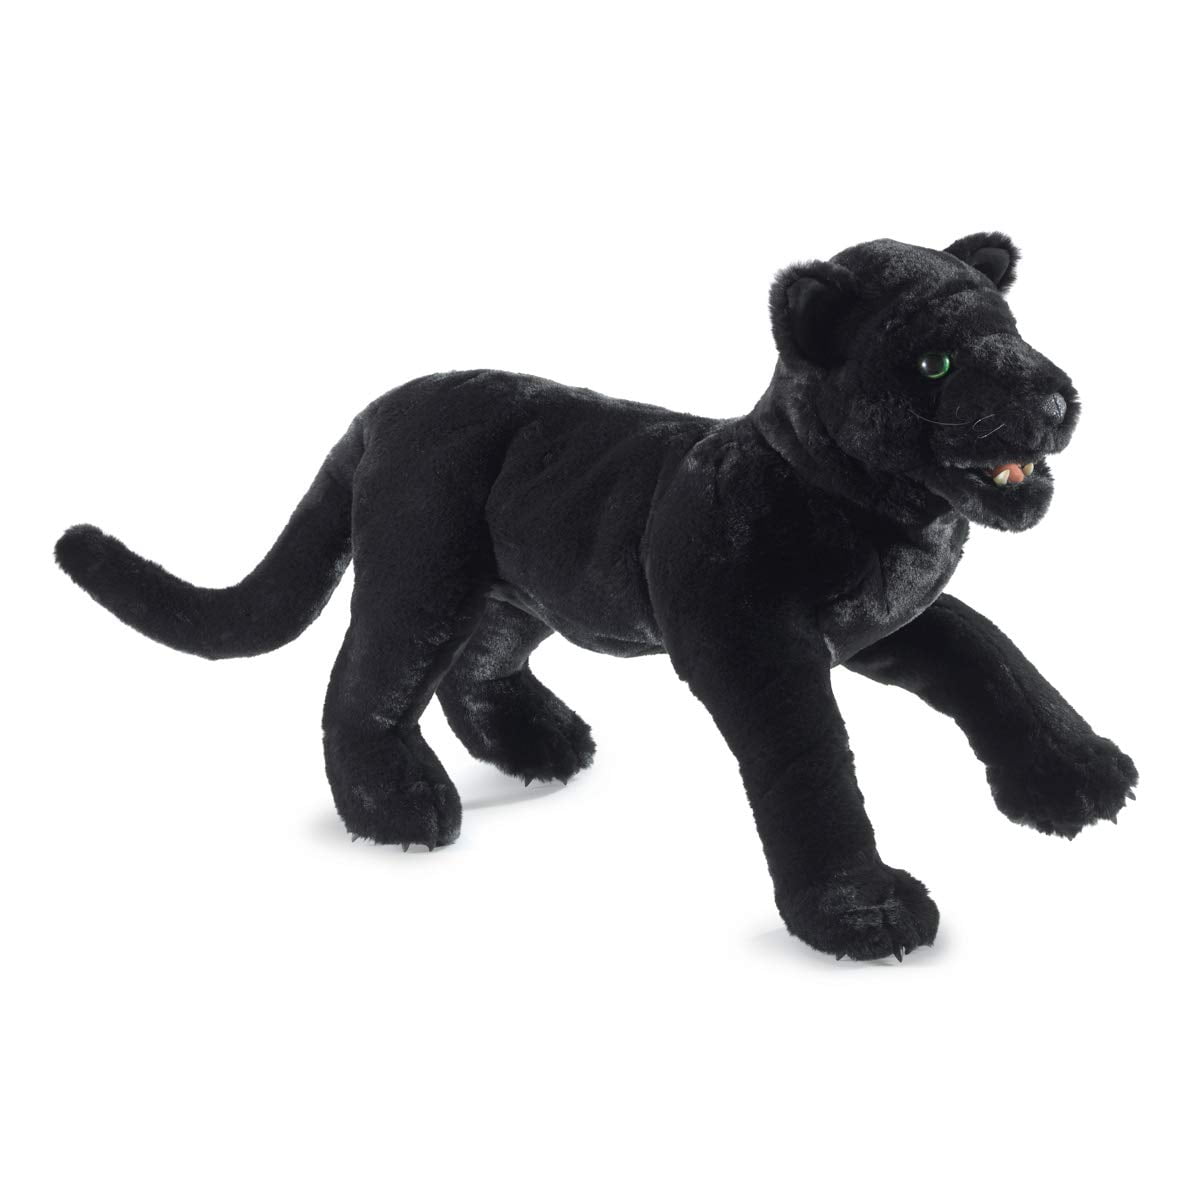 NEW PLUSH SOFT TOY Folkmanis 3155 Black Panther Wild Cat Hand Puppet 